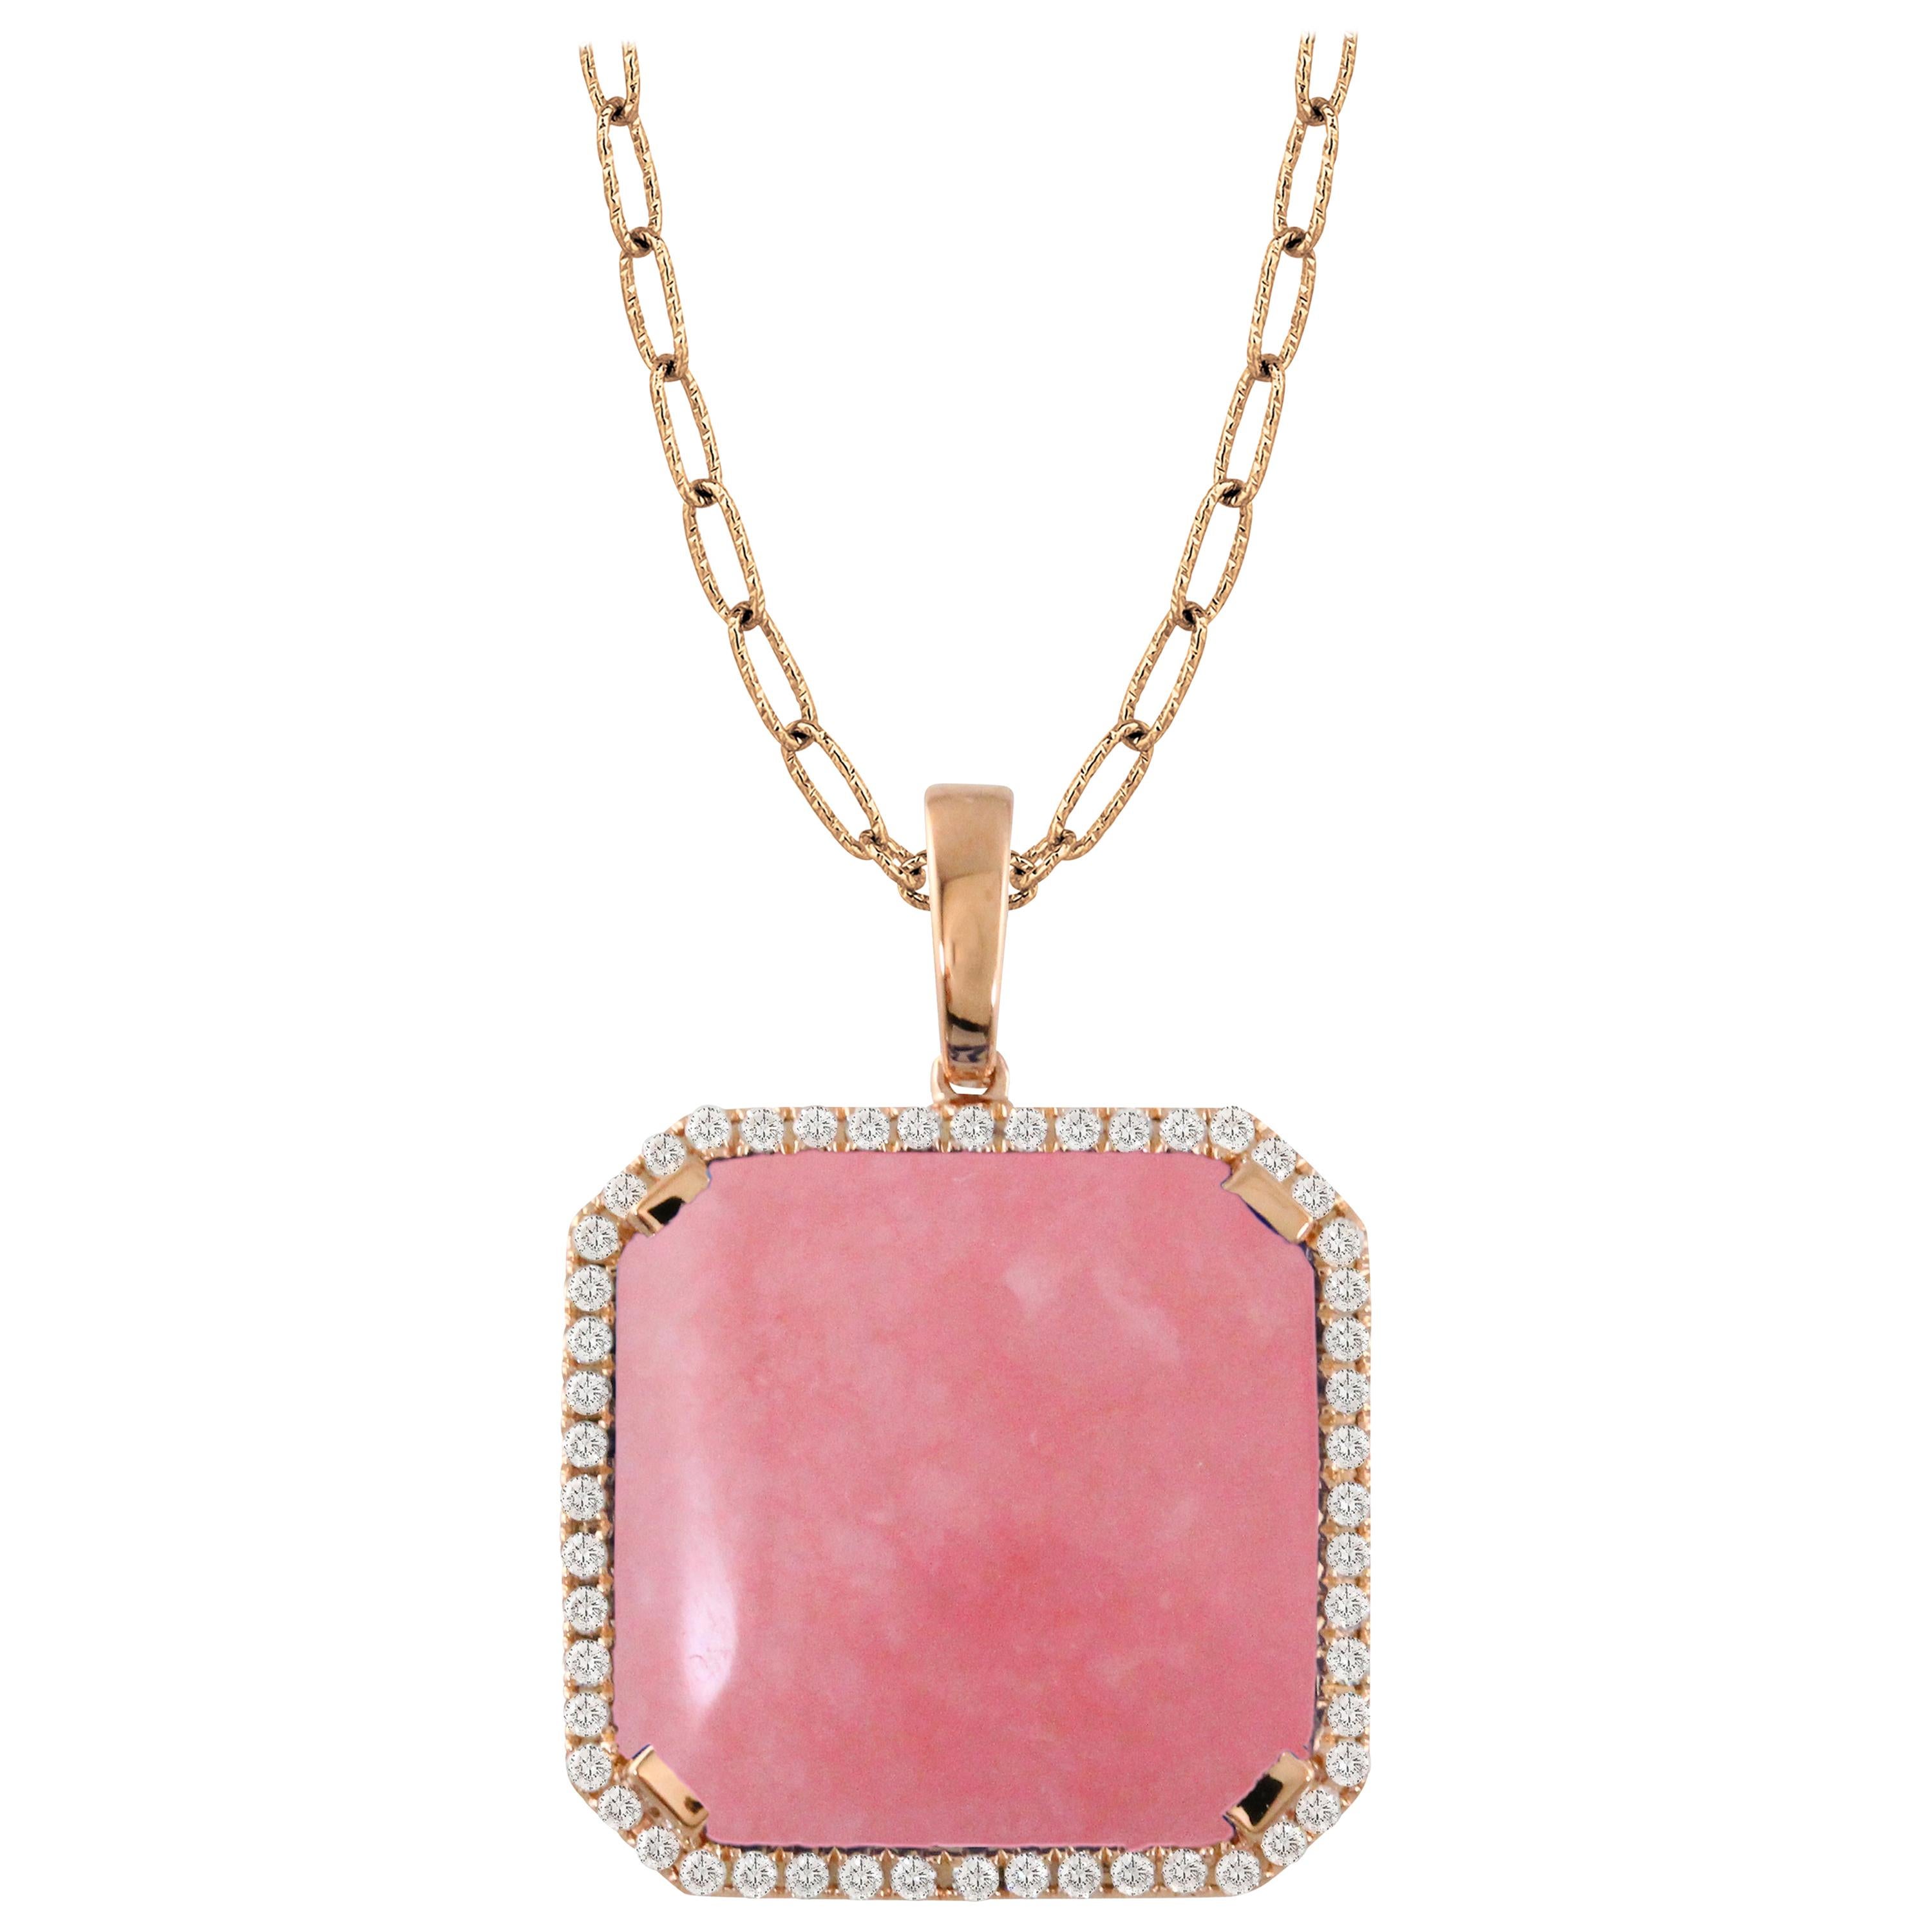 18 Karat Rose Gold Hexagon Pendant Necklace with Cabochon Pink Opal and  Diamonds